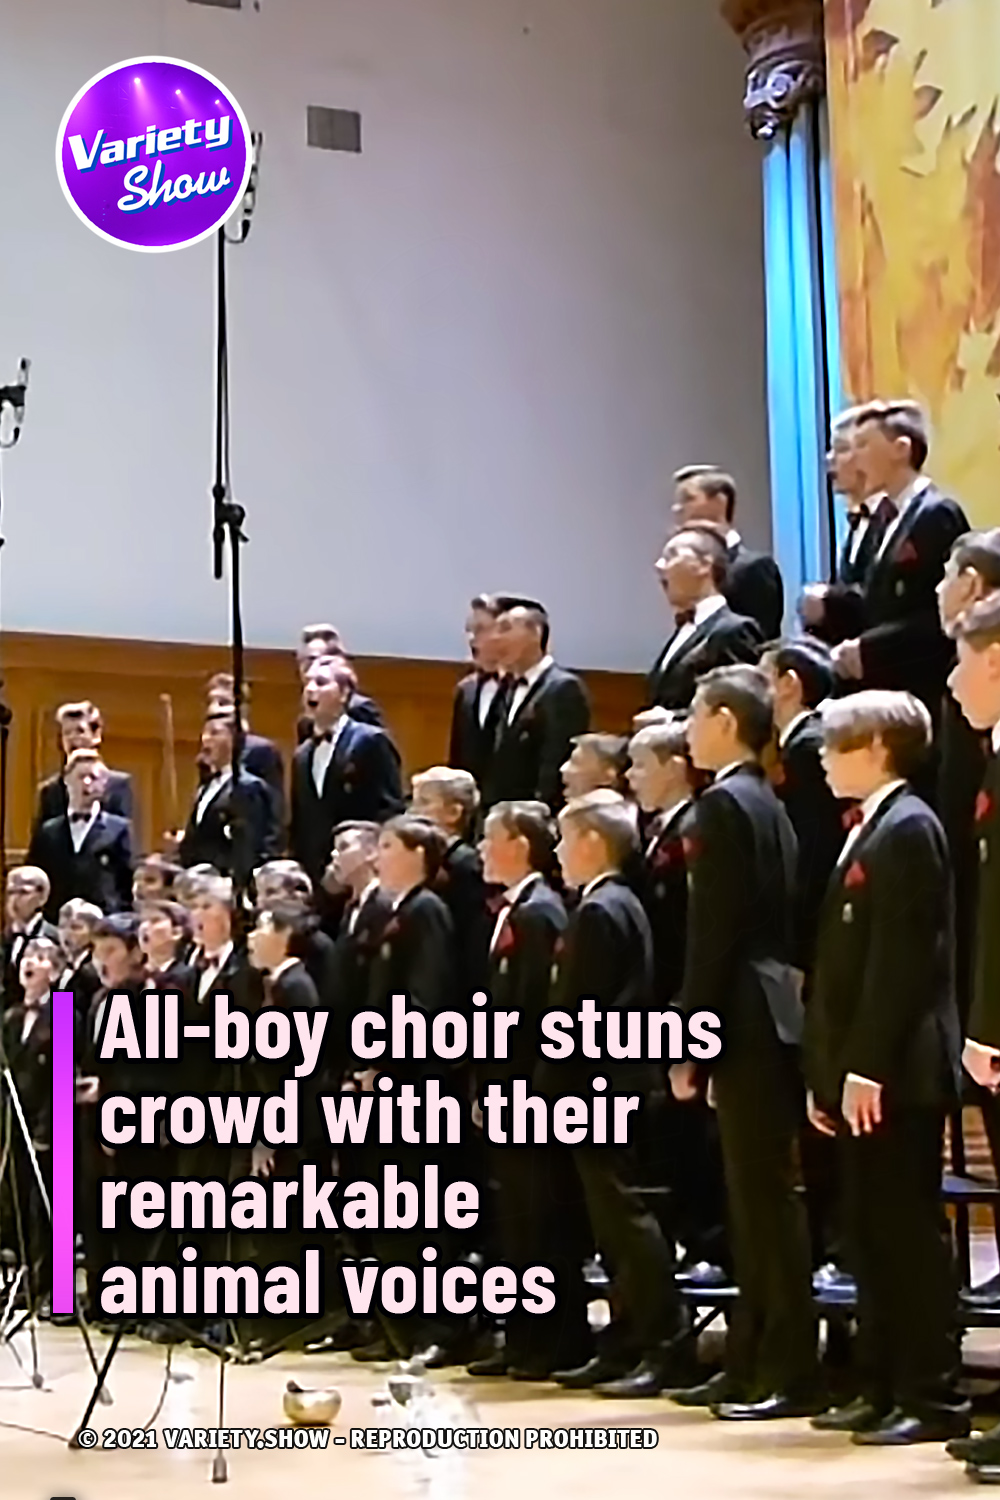 All-boy choir stuns crowd with their remarkable animal voices